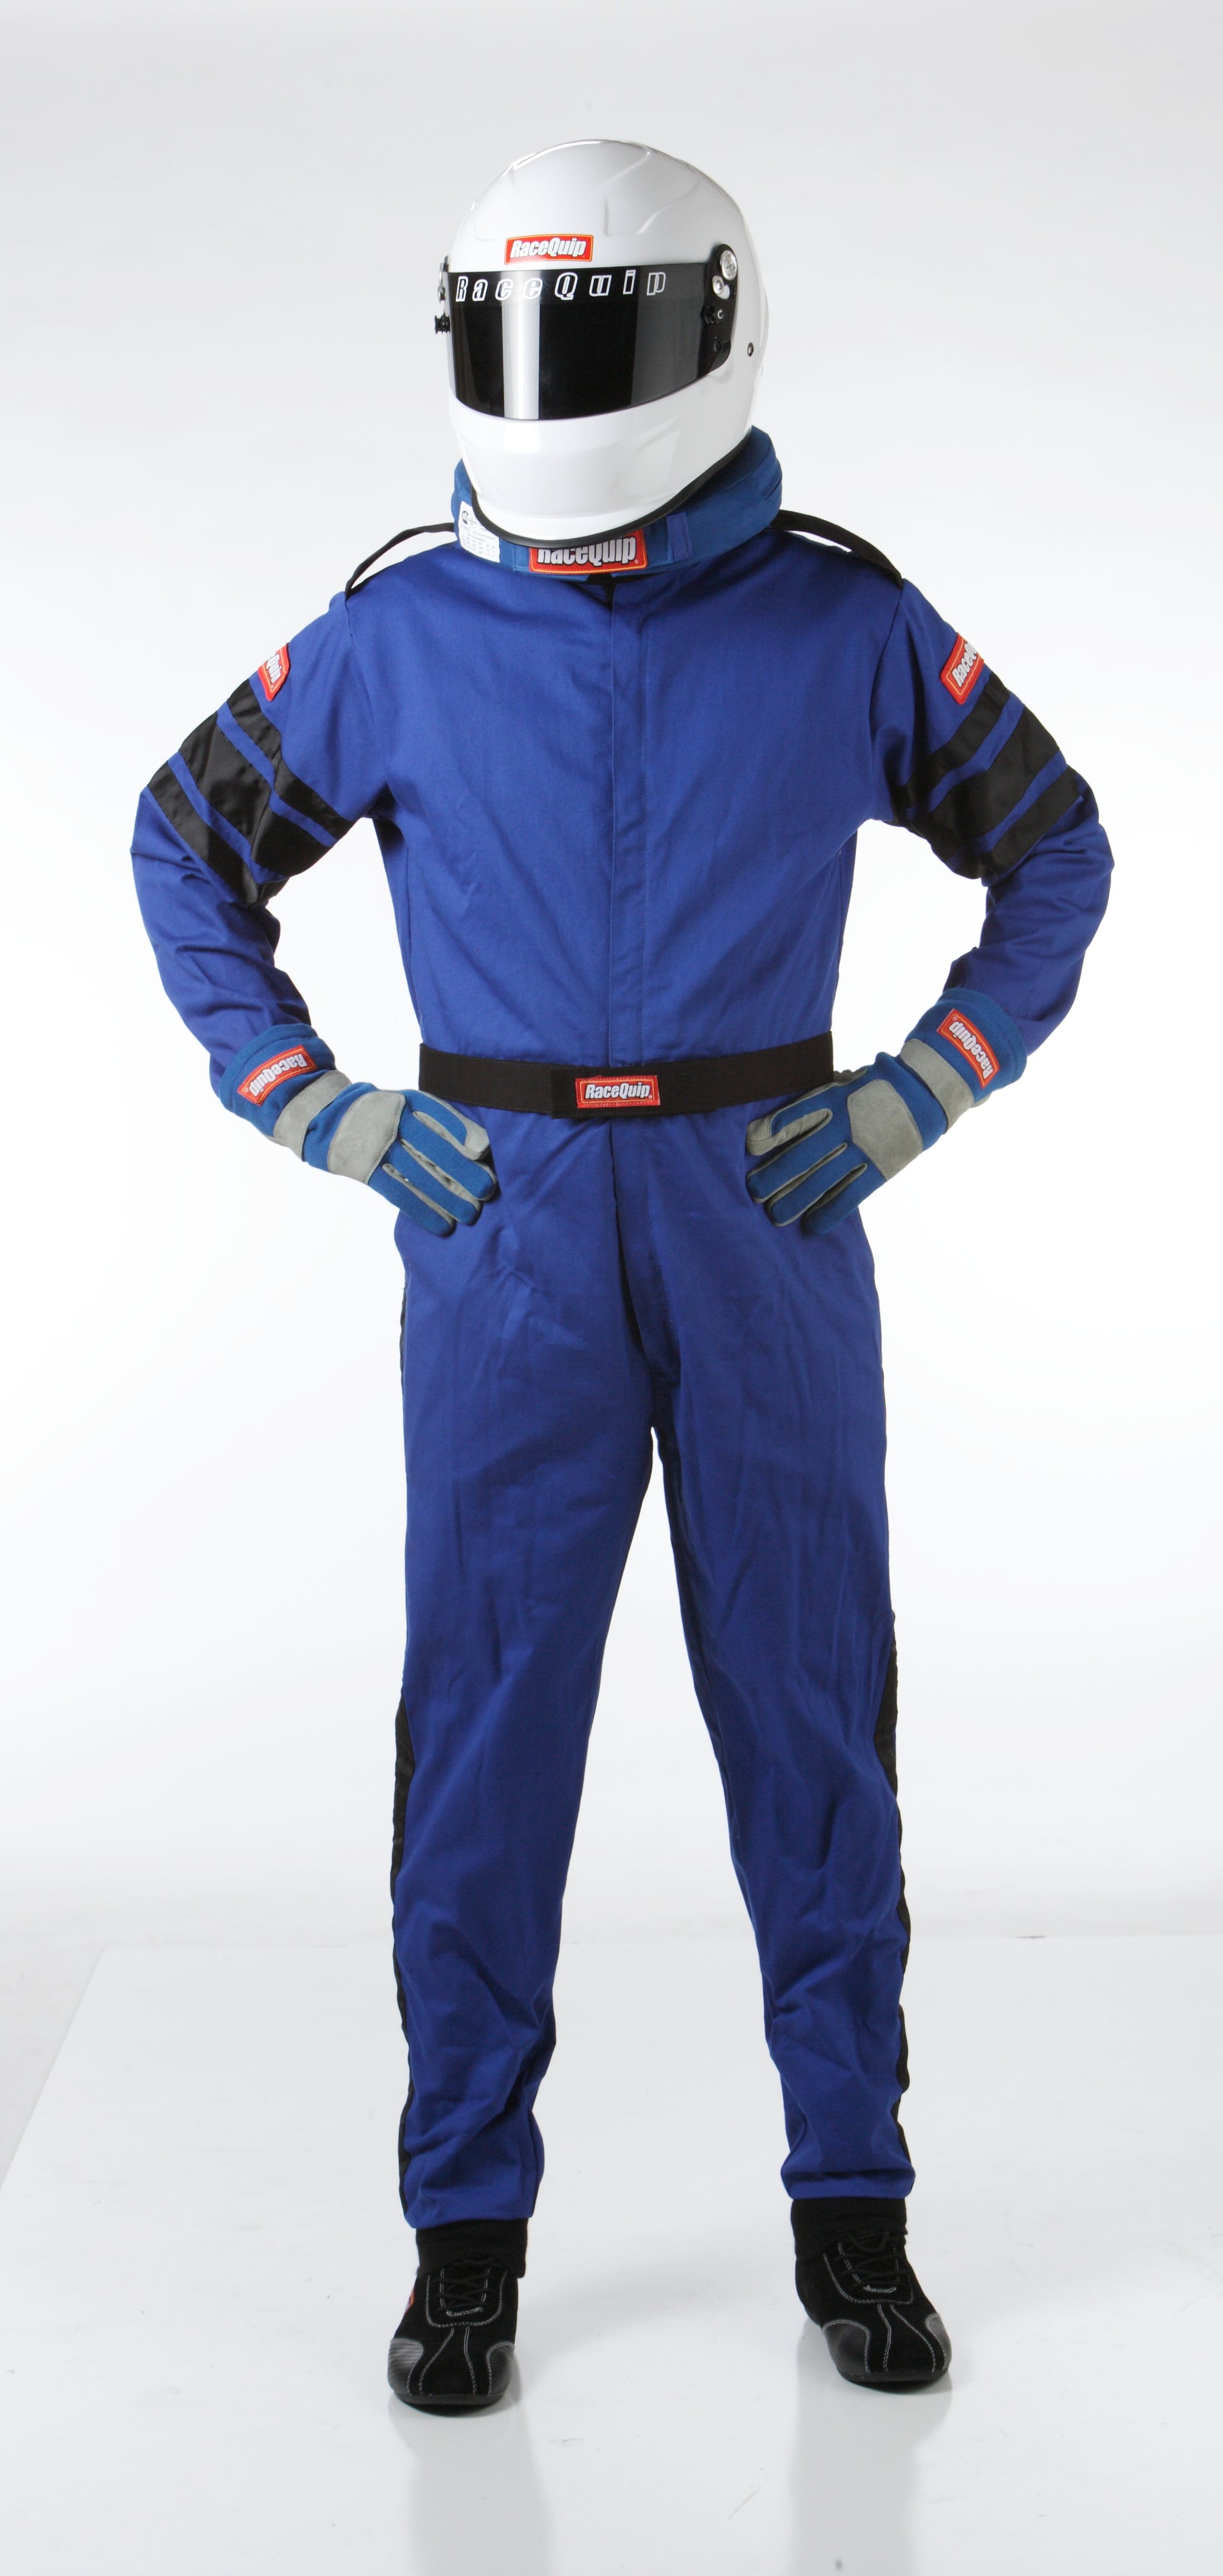 RaceQuip 110025 SFI-1 Pyrovatex One-Piece Single-Layer Racing Fire Suit (Blue, Large)